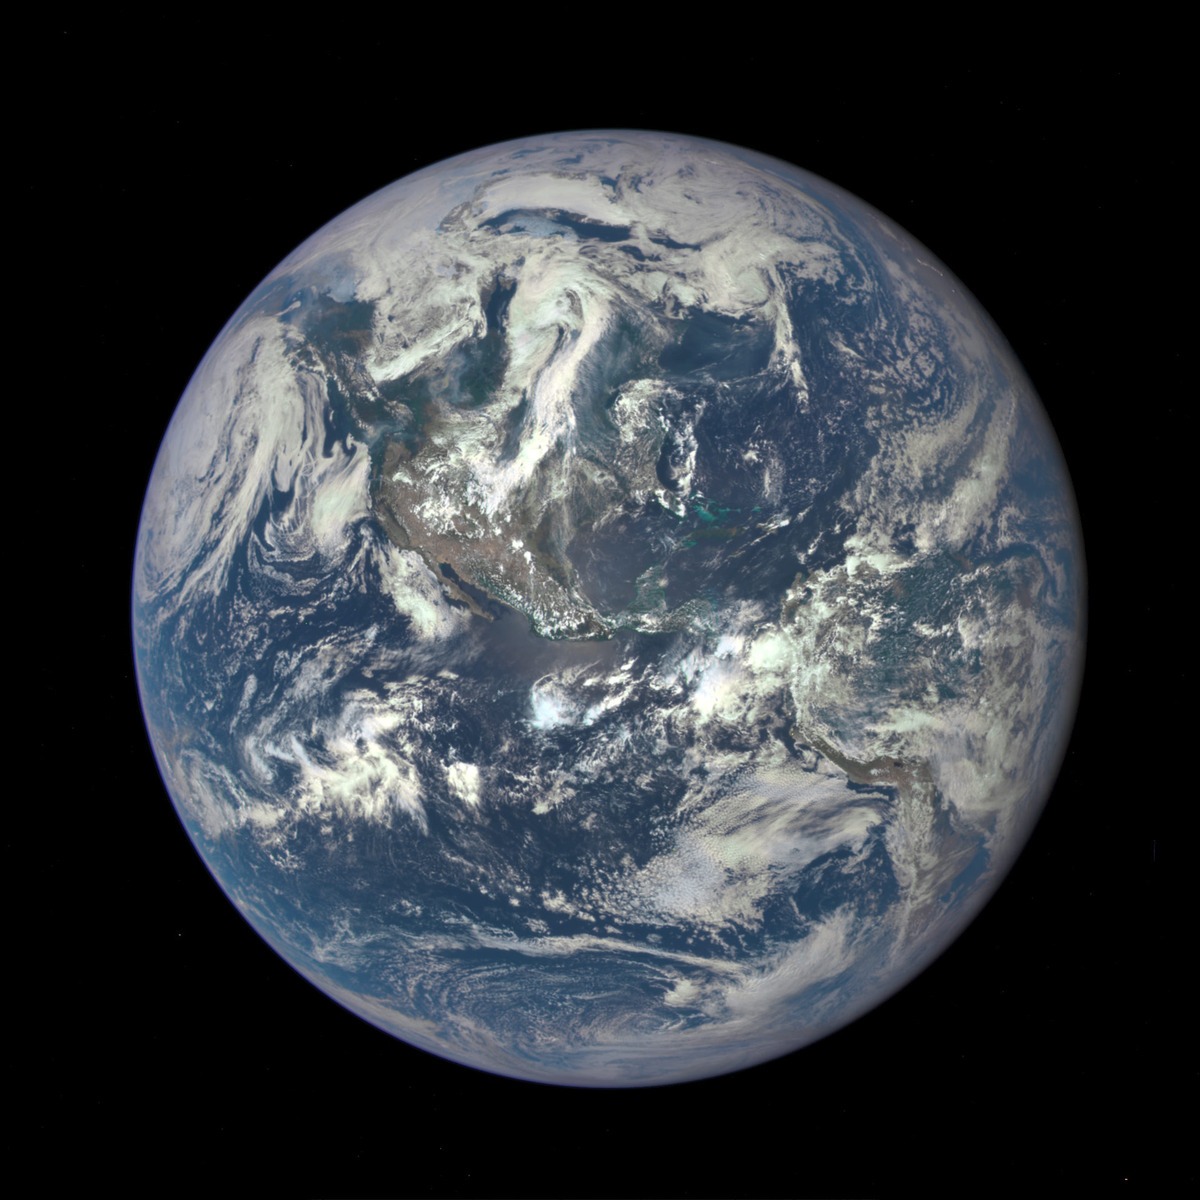 NASA camera takes 'blue marble' photo of Earth from 1 million miles away